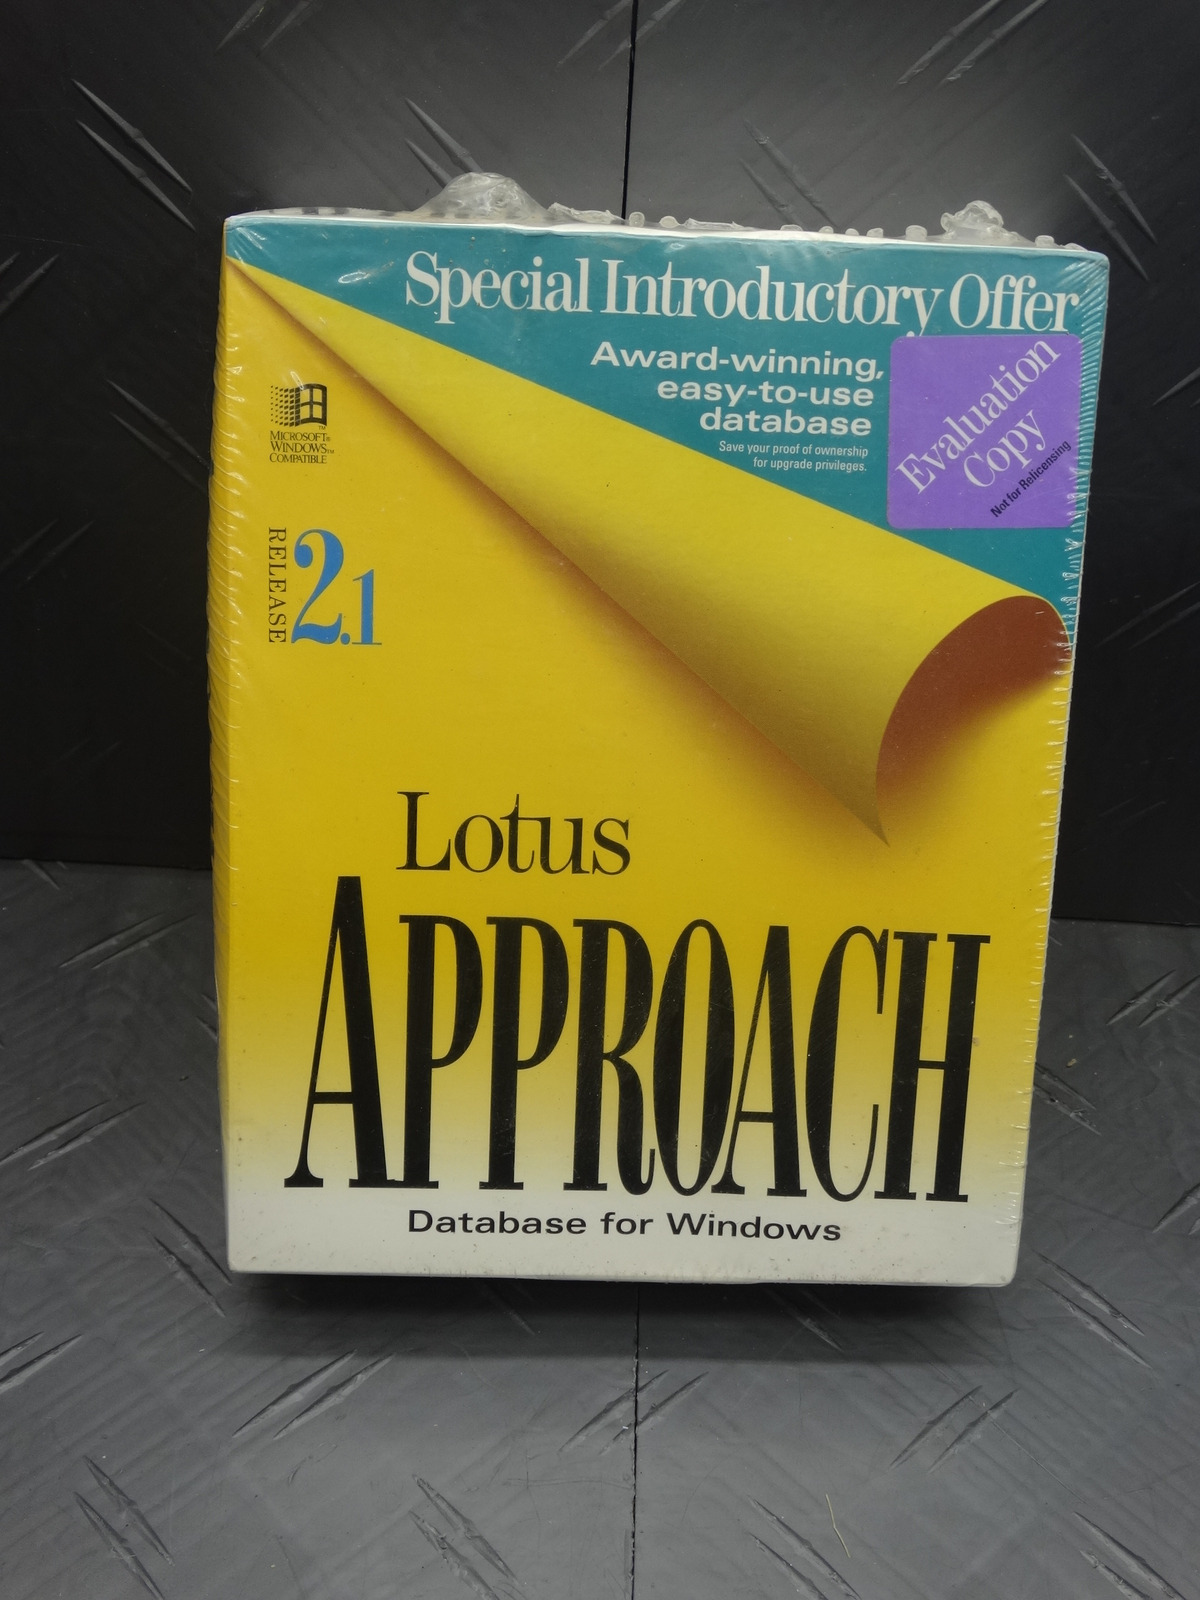 Lotus Approach Database for Windows Release 2.1 Mainframe Collection Rare Sealed